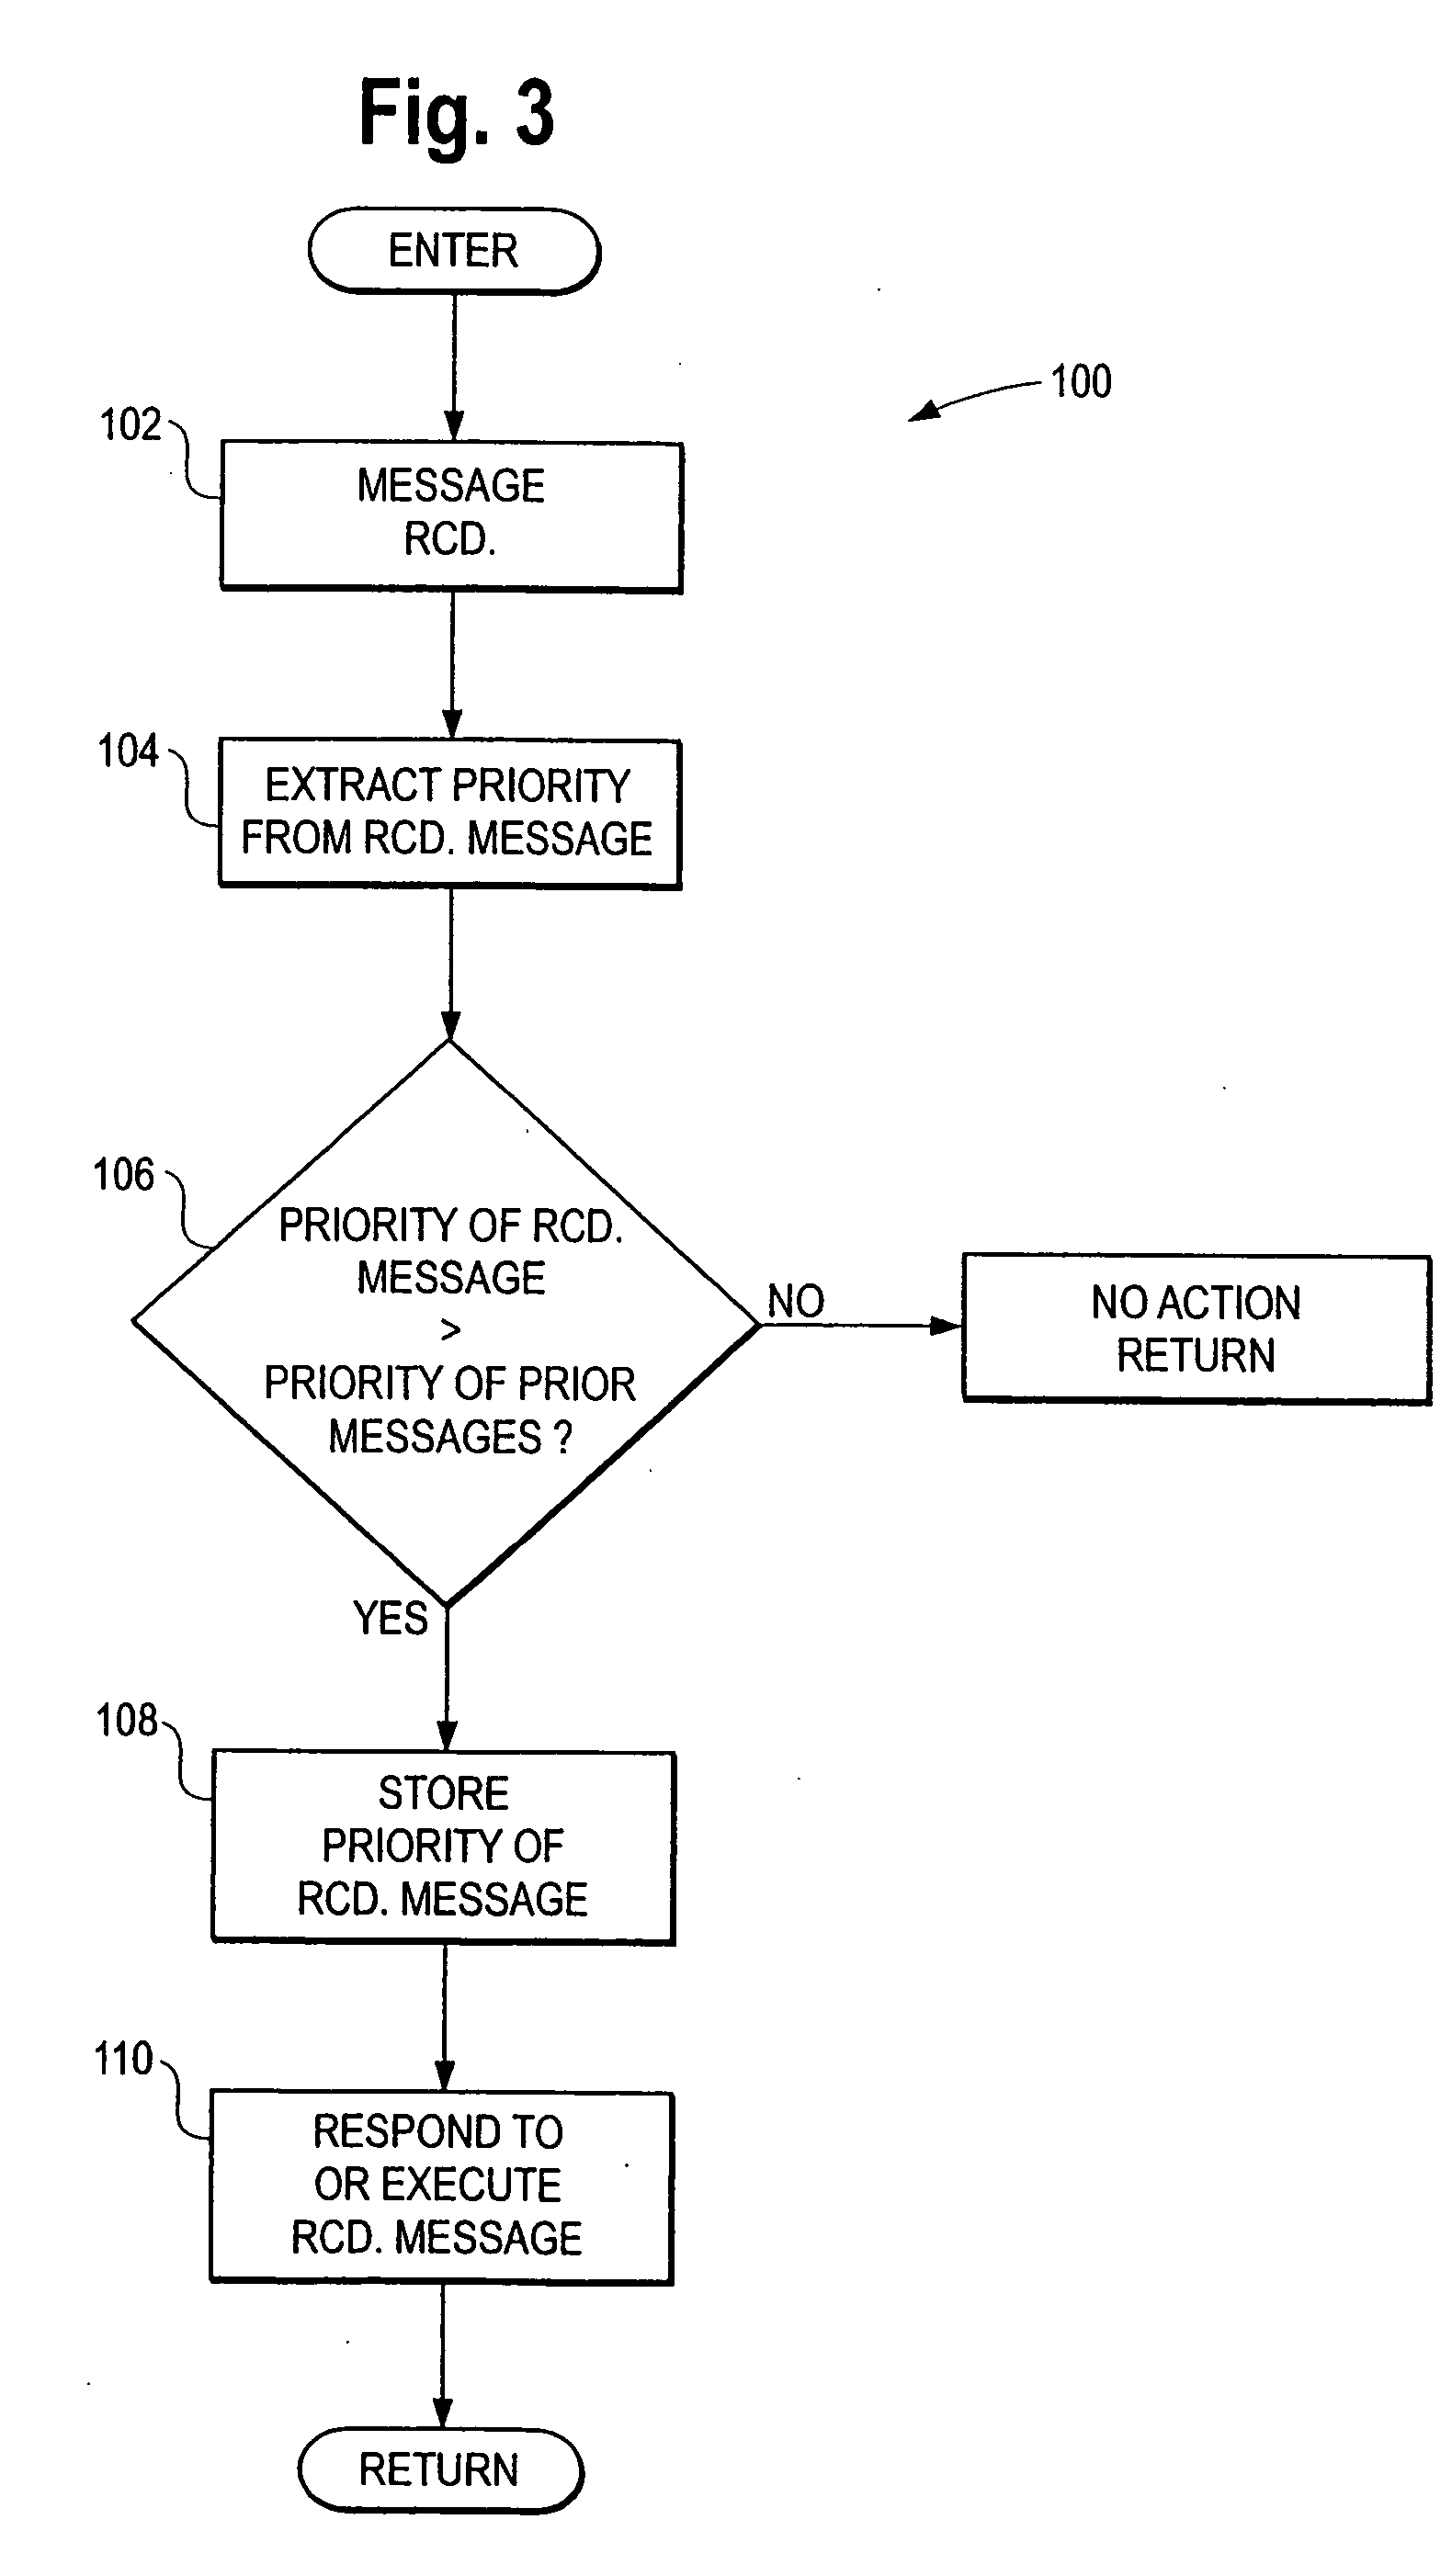 Multi-processor communications system incorporating prioritized messaging